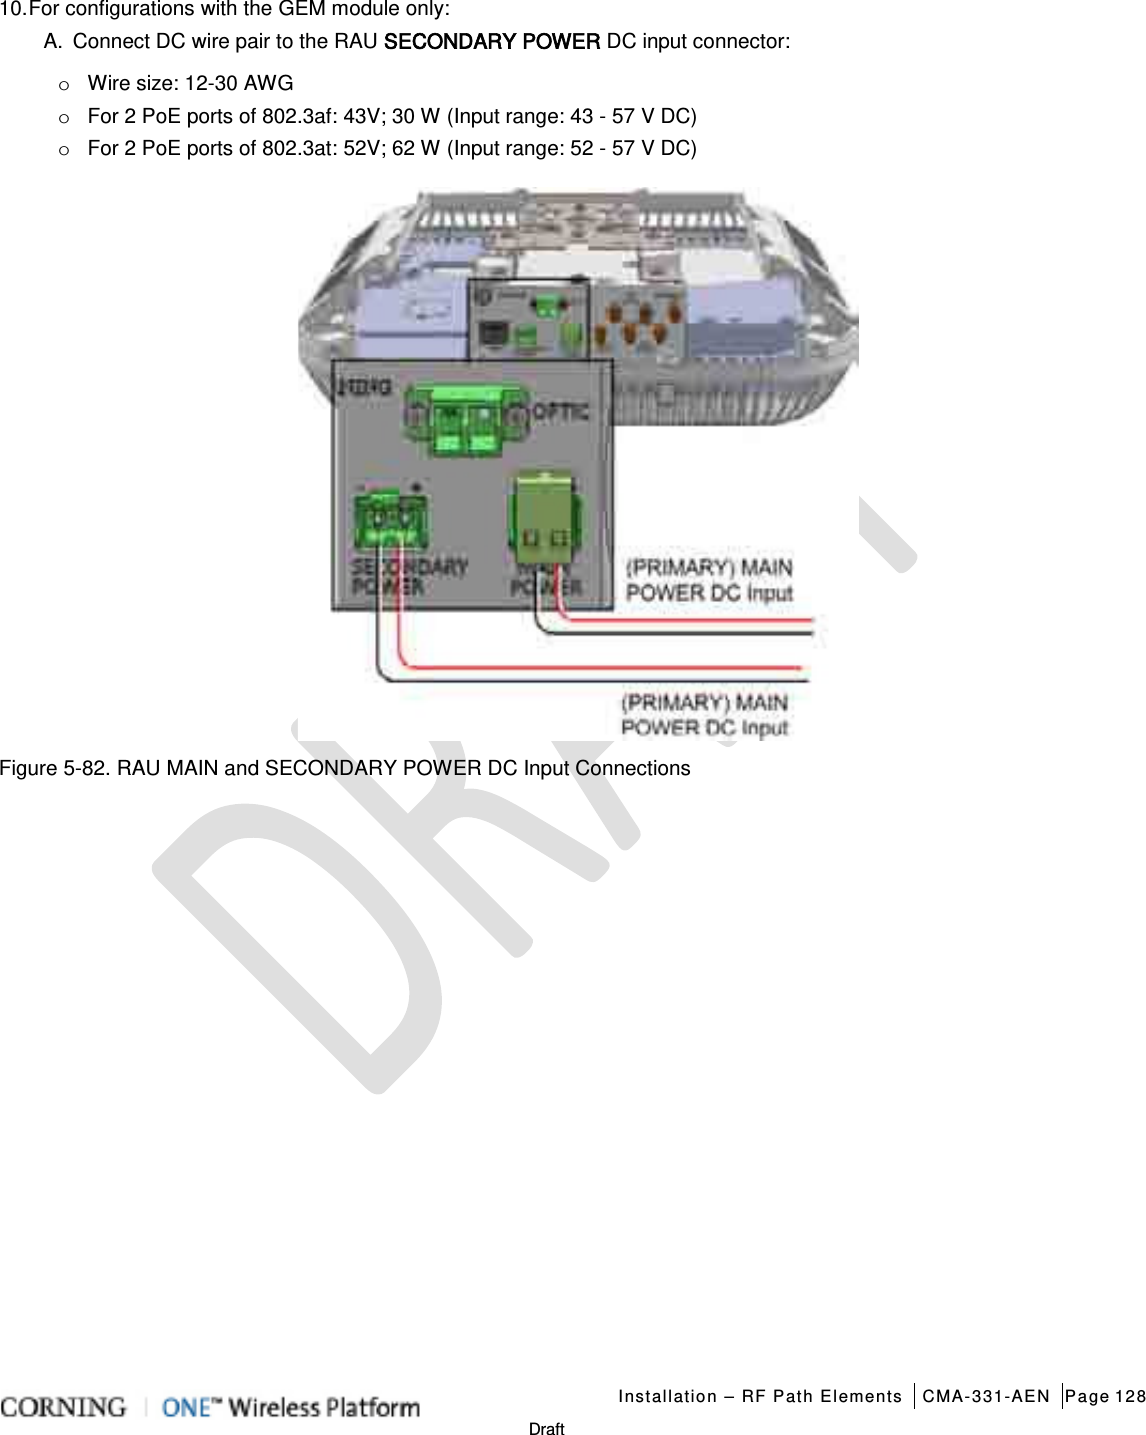   Installation – RF Path Elements CMA-331-AEN Page 128   Draft 10. For configurations with the GEM module only: A.  Connect DC wire pair to the RAU SECONDARY POWER DC input connector: o Wire size: 12-30 AWG o For 2 PoE ports of 802.3af: 43V; 30 W (Input range: 43 - 57 V DC) o For 2 PoE ports of 802.3at: 52V; 62 W (Input range: 52 - 57 V DC)  Figure  5-82. RAU MAIN and SECONDARY POWER DC Input Connections    